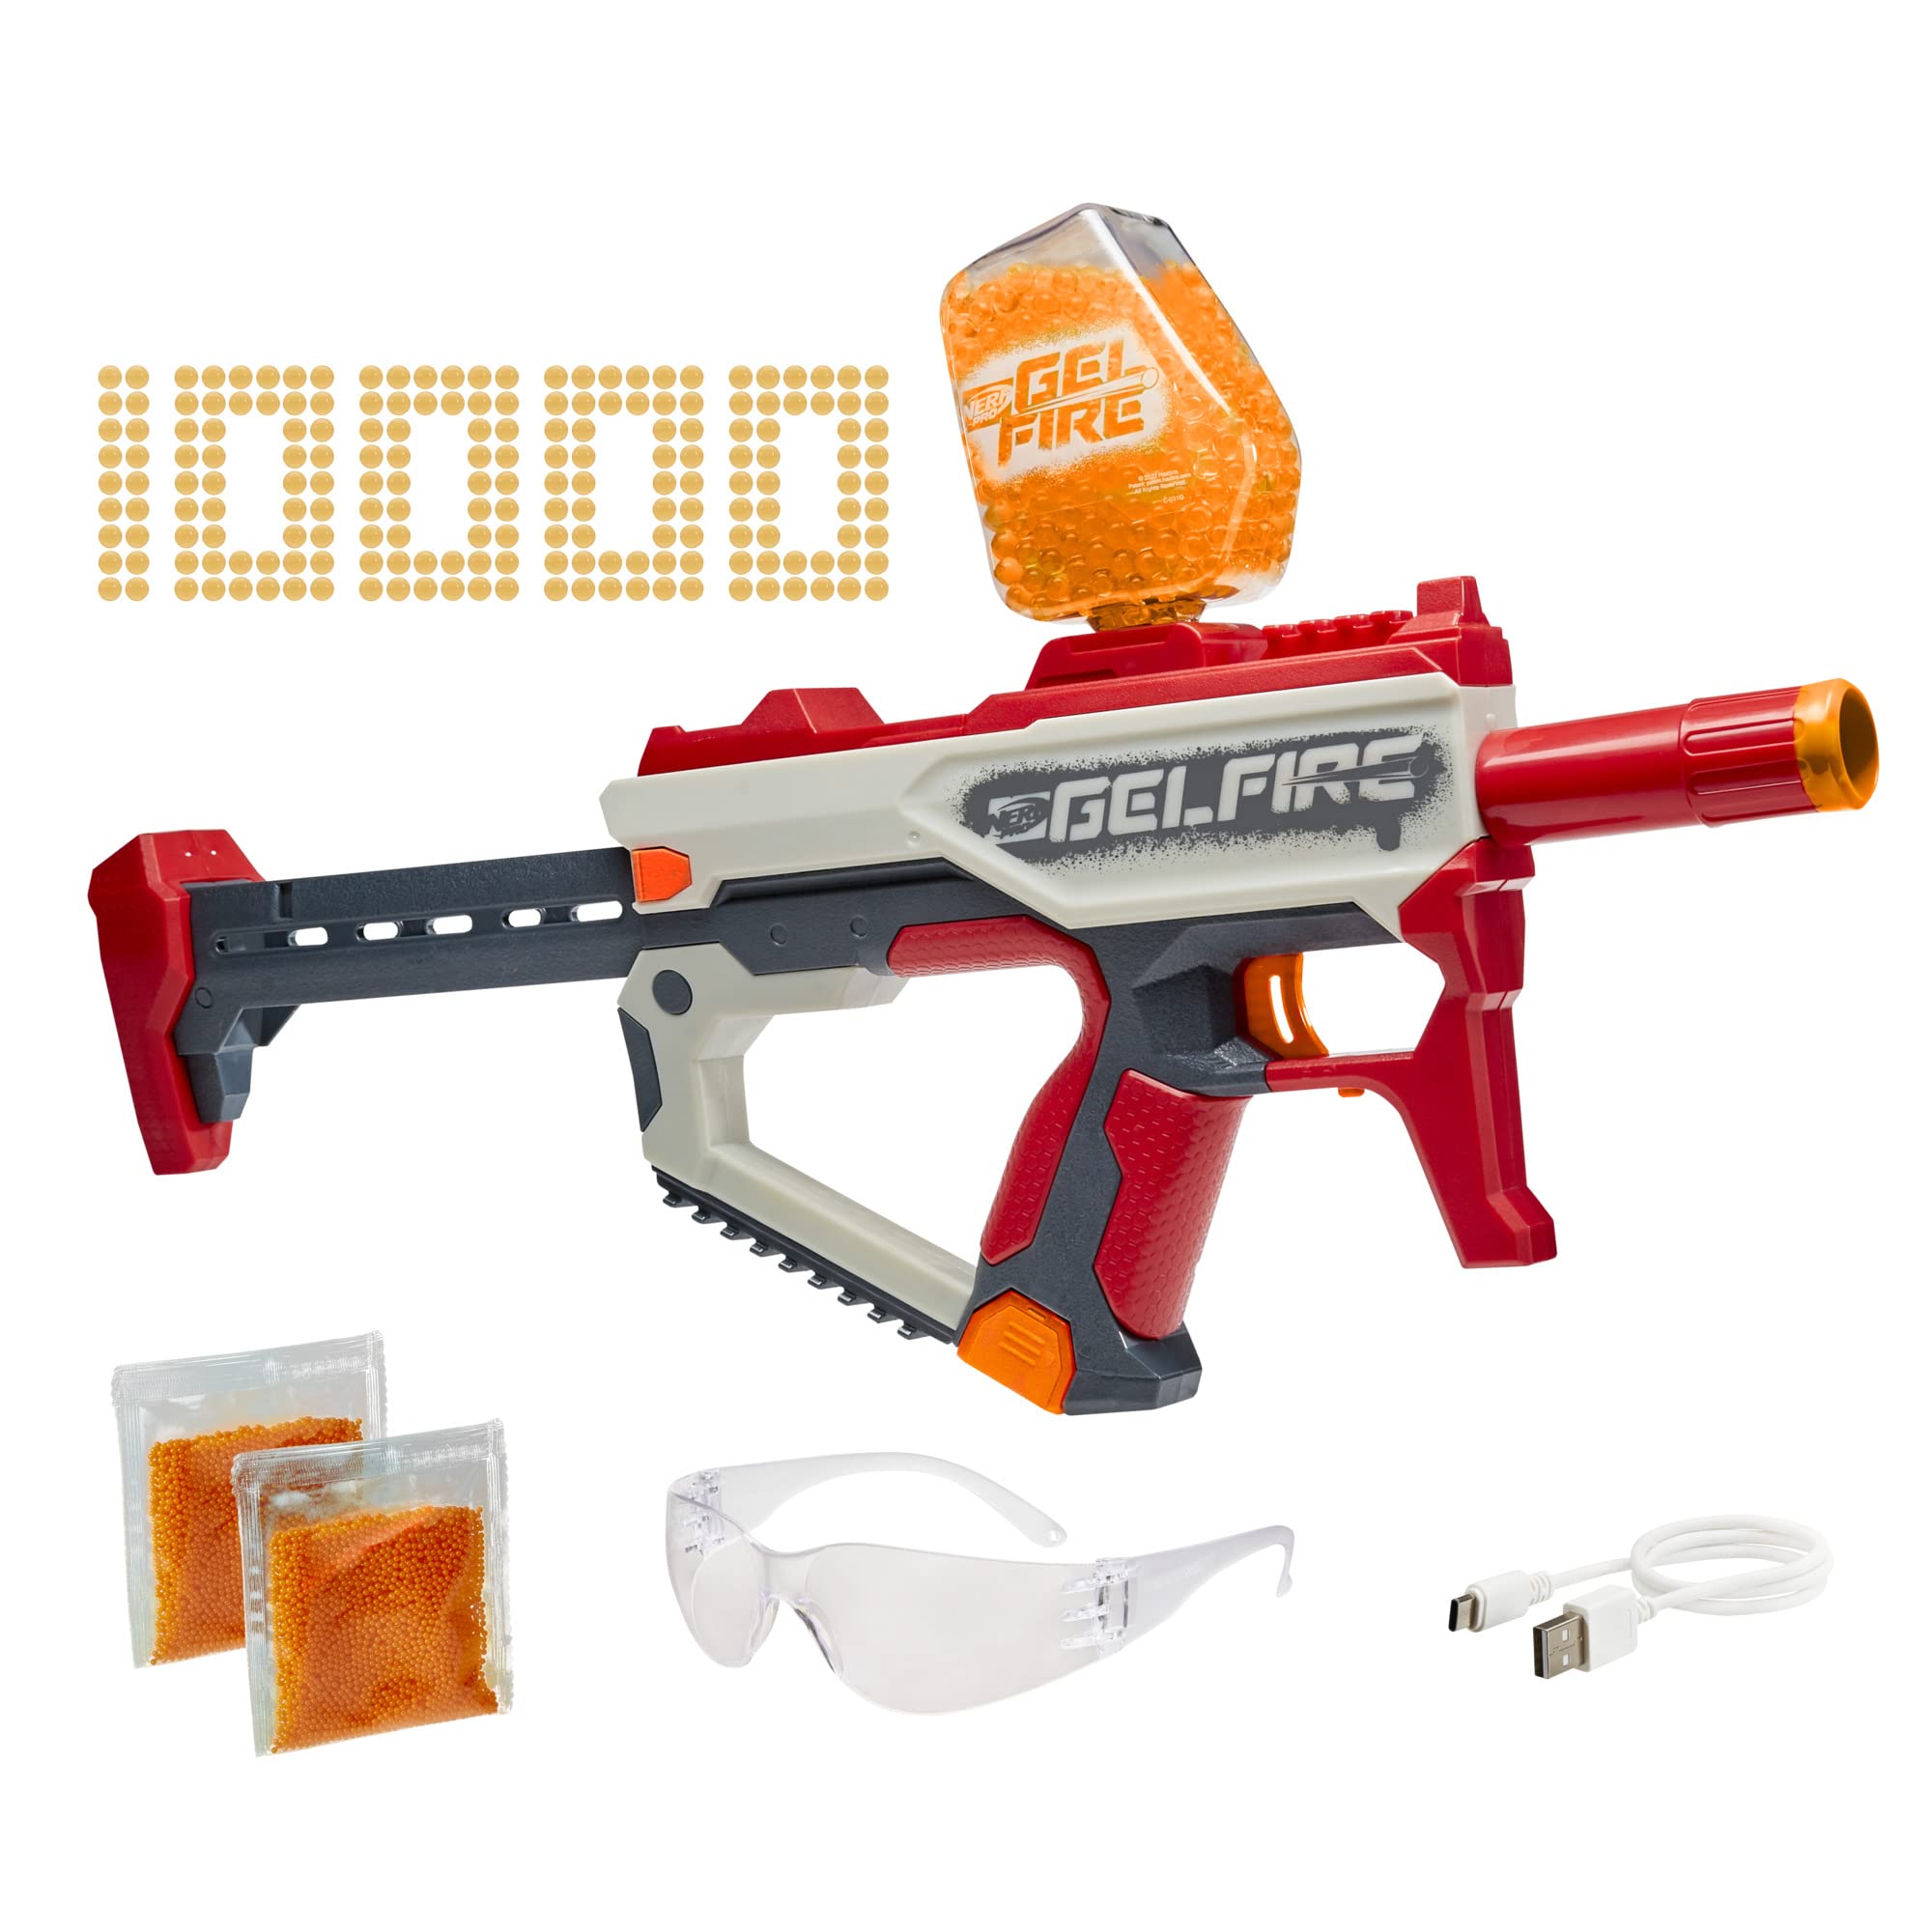 Nerf Pro Gelfire Mythic Full Auto Blaster & 10,000 Gelfire Rounds, 800 Round Hopper, Rechargeable Battery, Eyewear, Ages 14 & Up, List Price is $79.99, Now Only $34.99, You Save $45